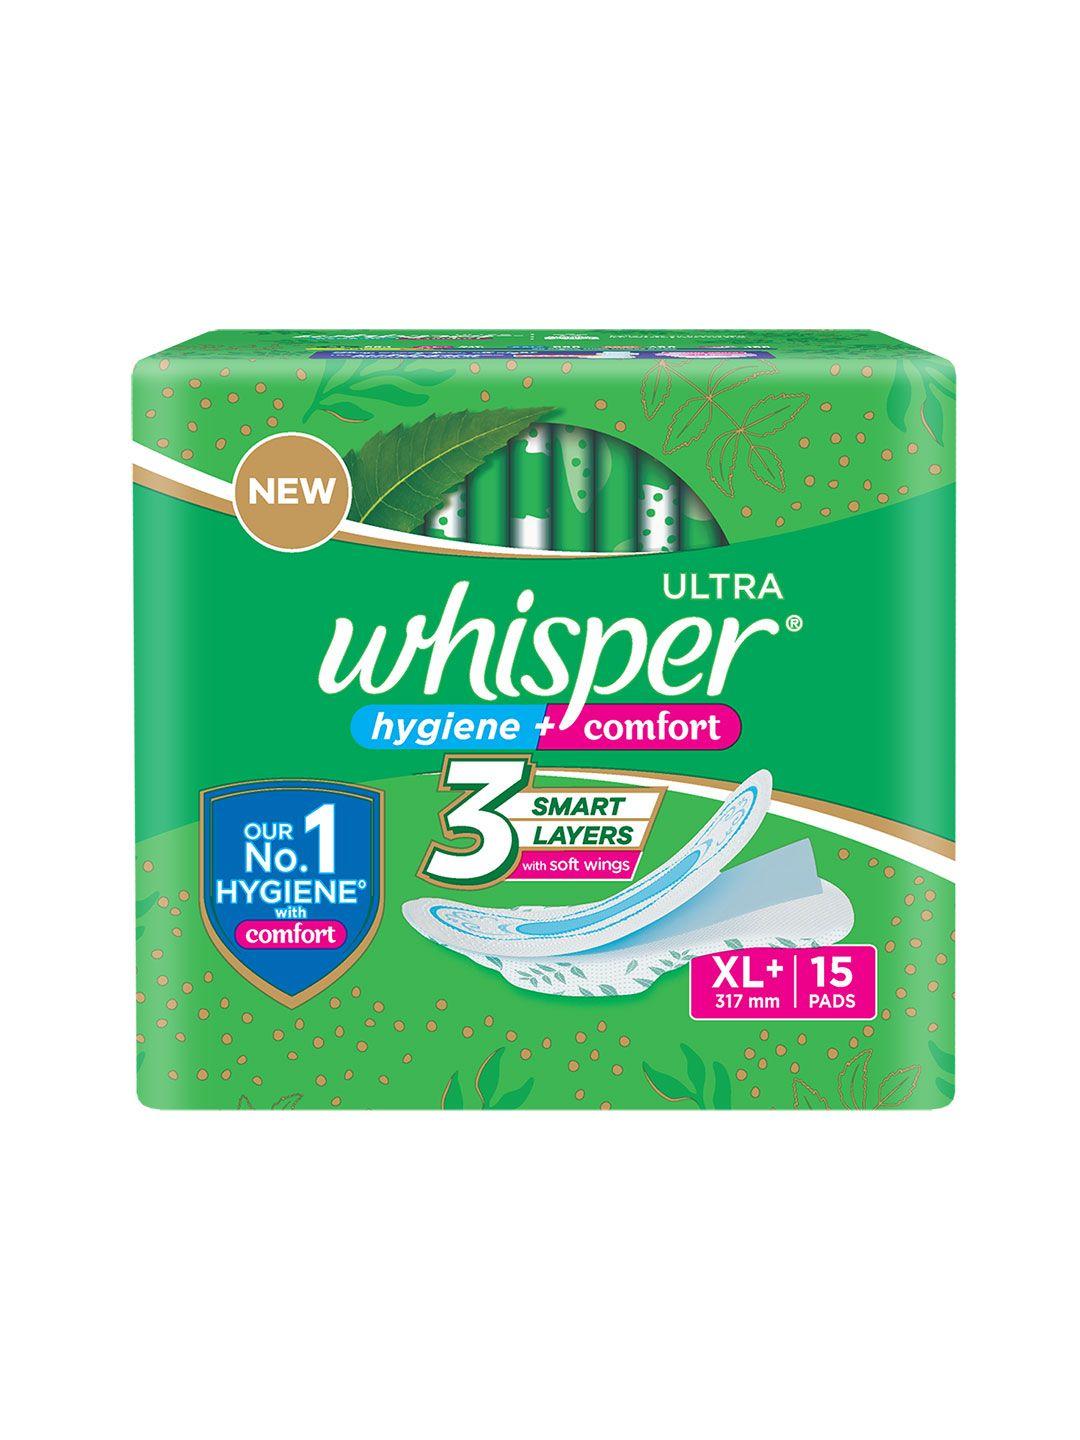 whisper ultra clean xl+ sanitary pads - 15 pads